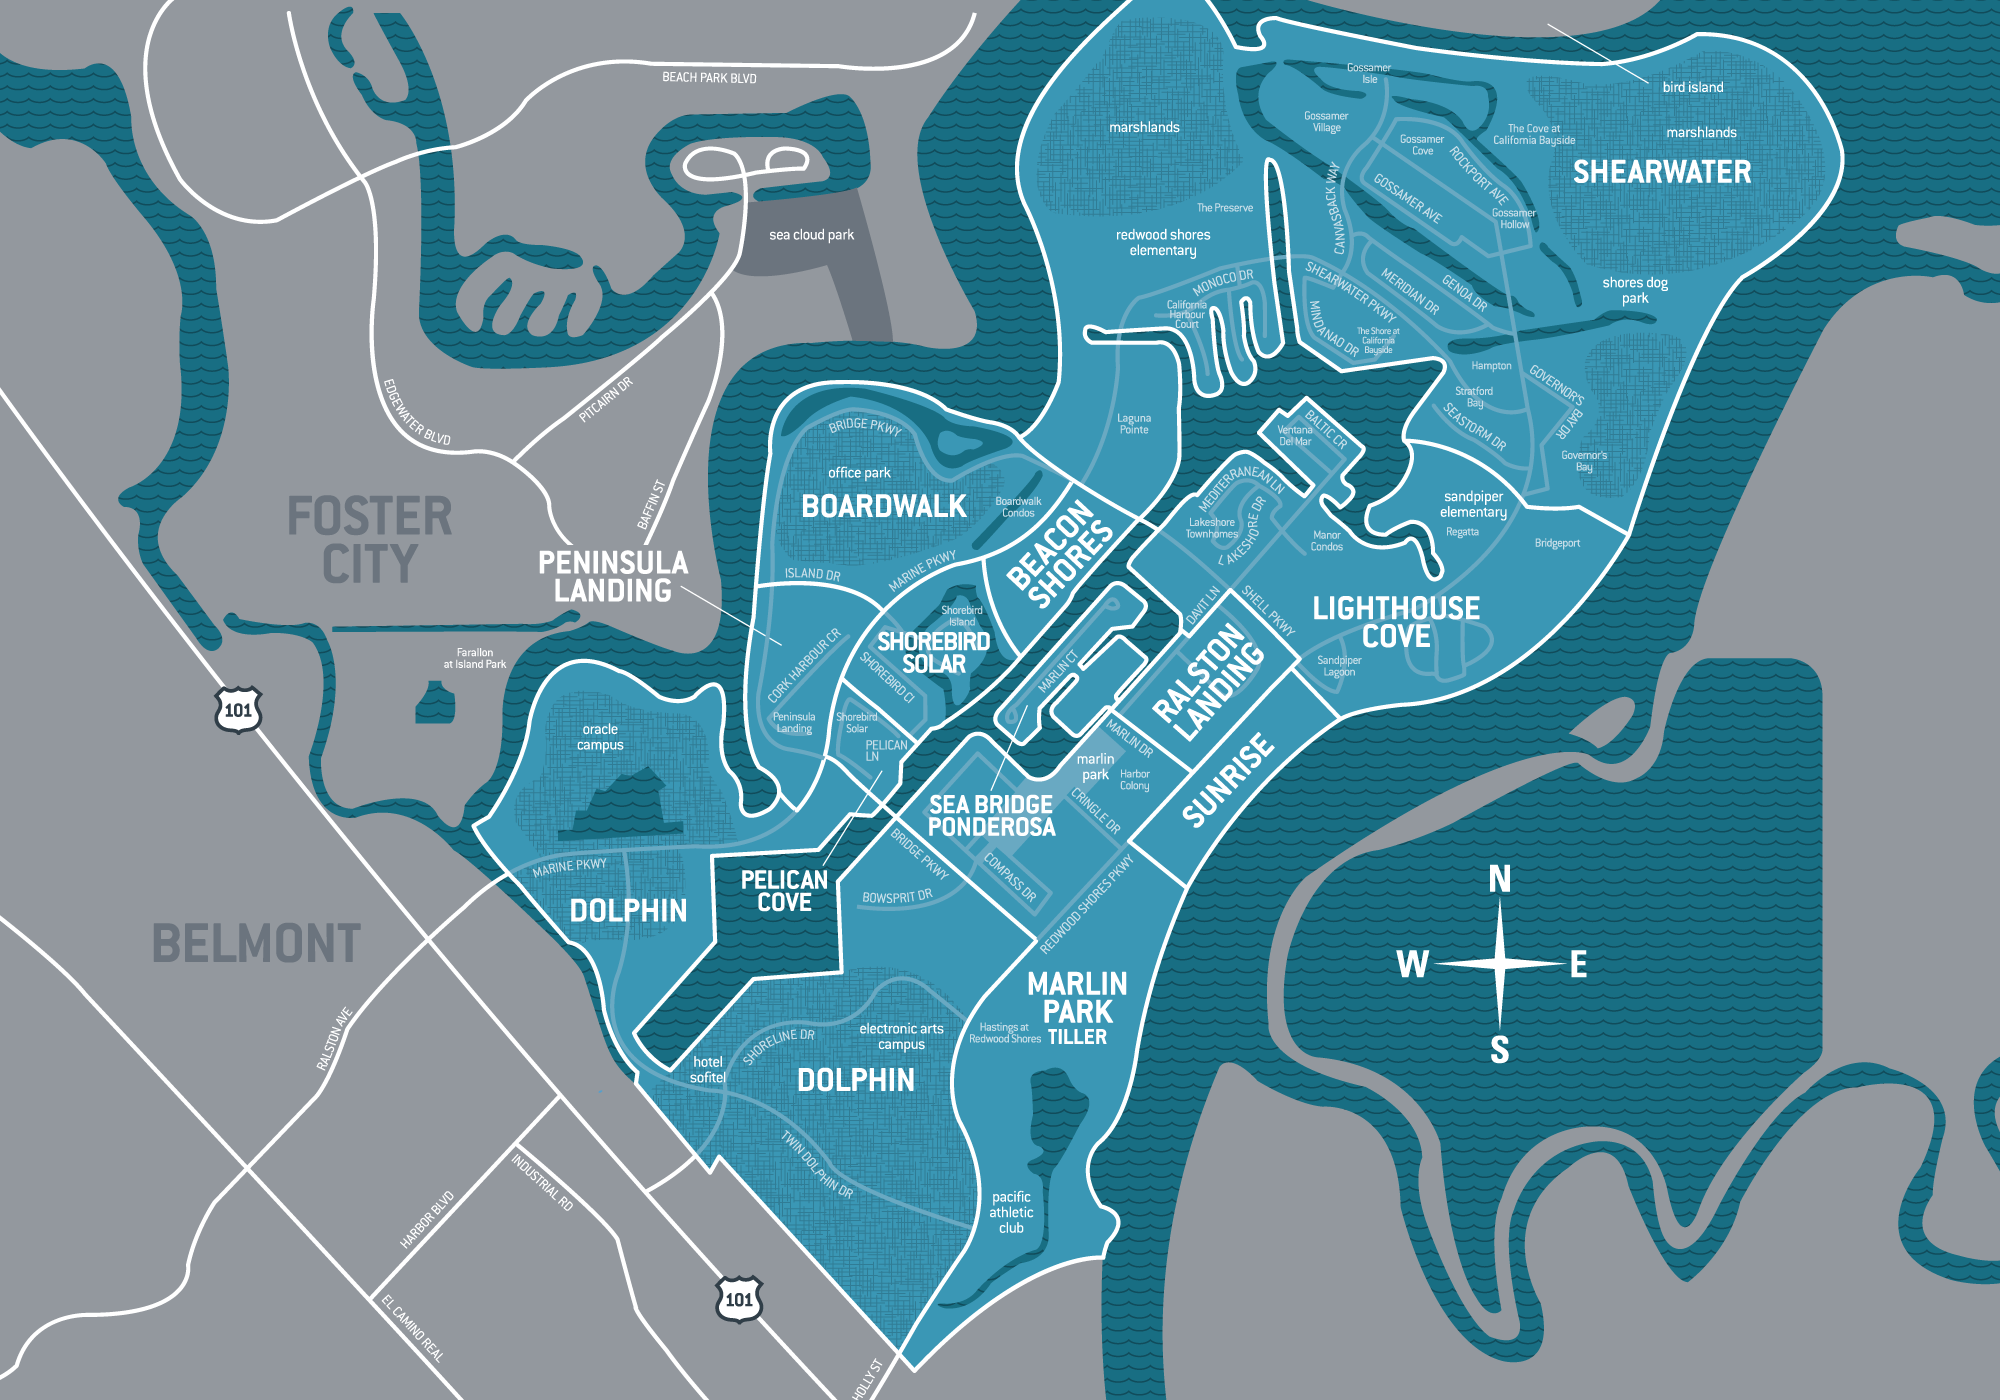 Shearwater redwood shores area map